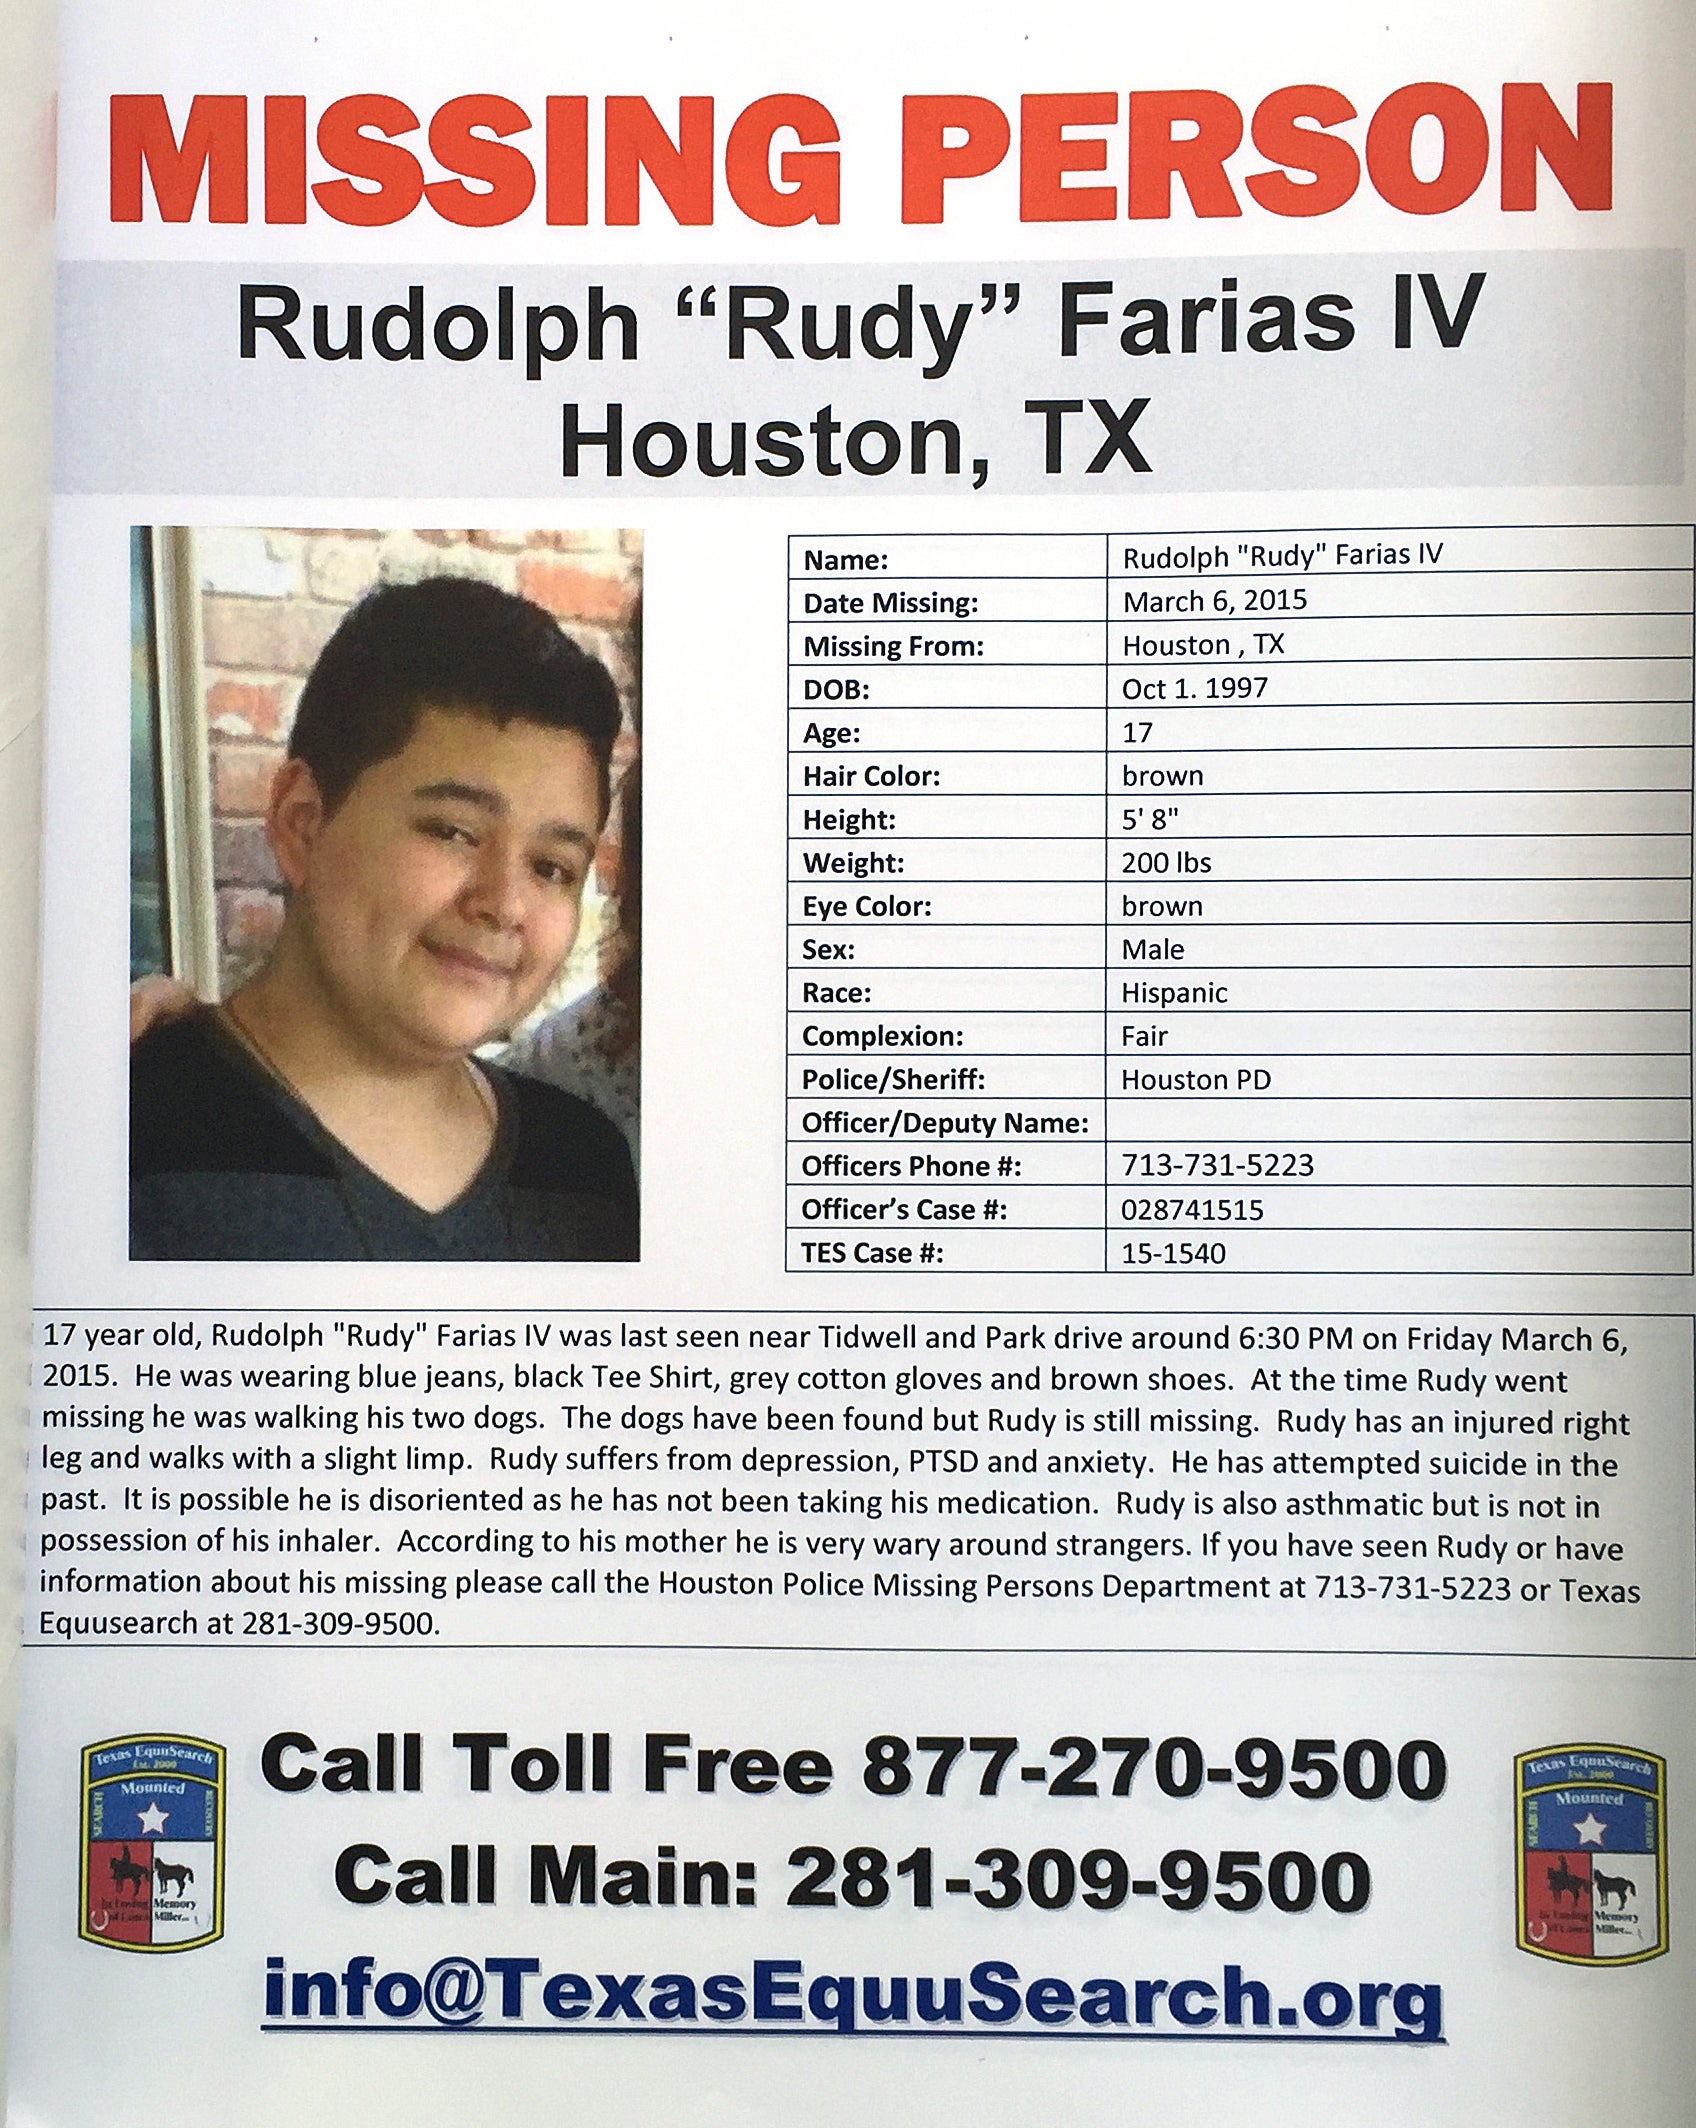 A missing poster for Rudolph ‘Rudy’ Farias IV. Mr Farias went missing on 6 March 2015 and was found over the weekend